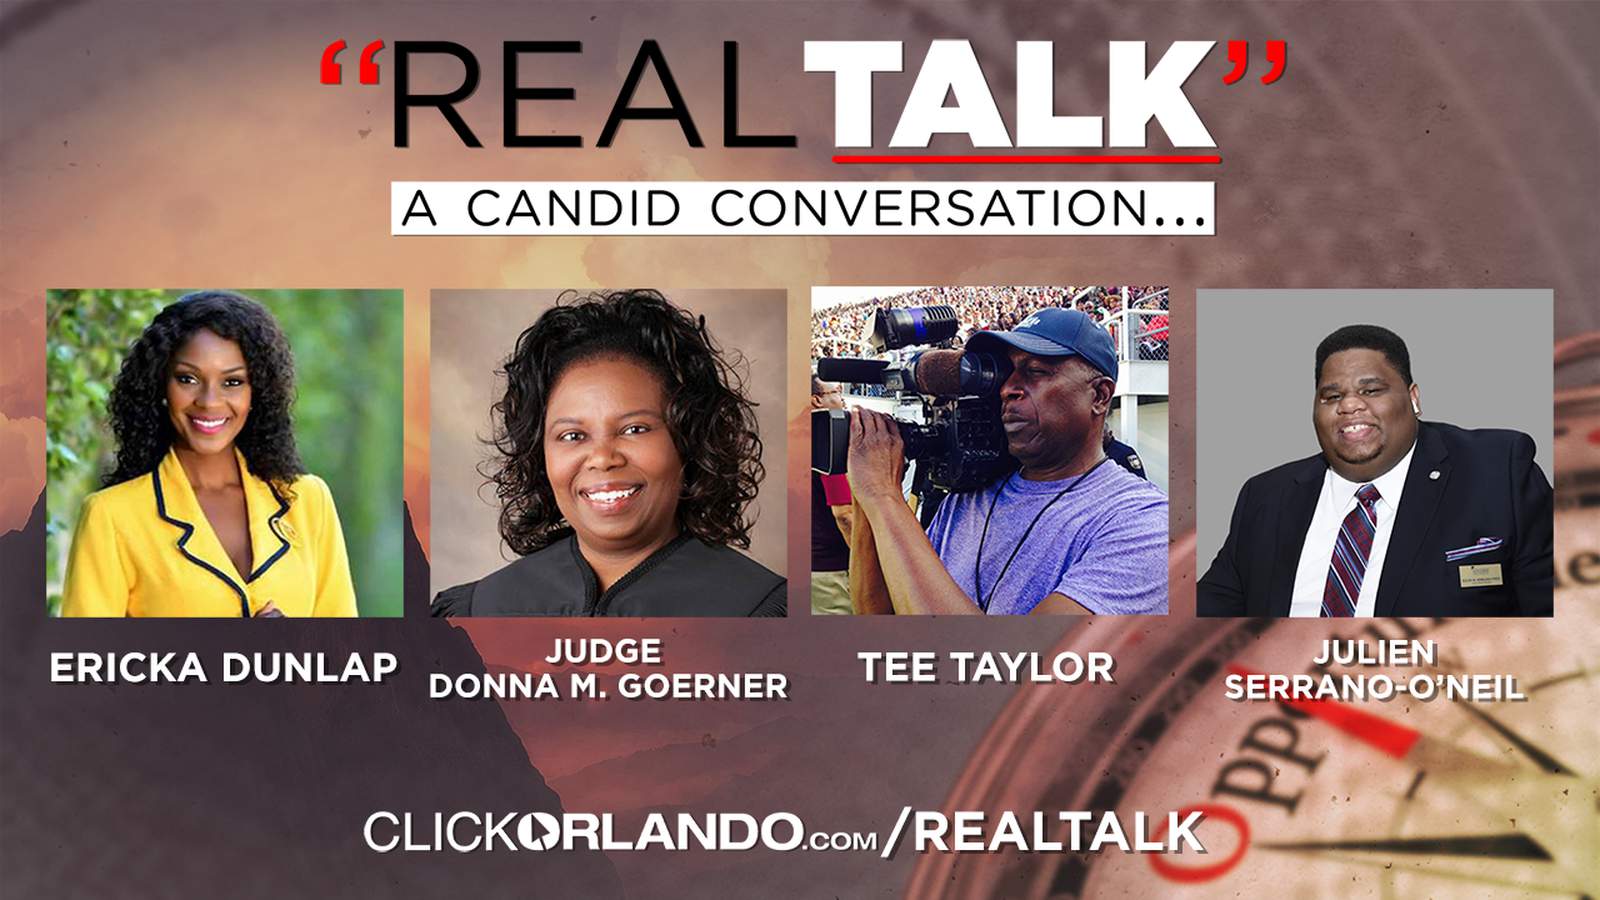 Meet the panelists for the Real Talk: Obstacles and Opportunities town hall